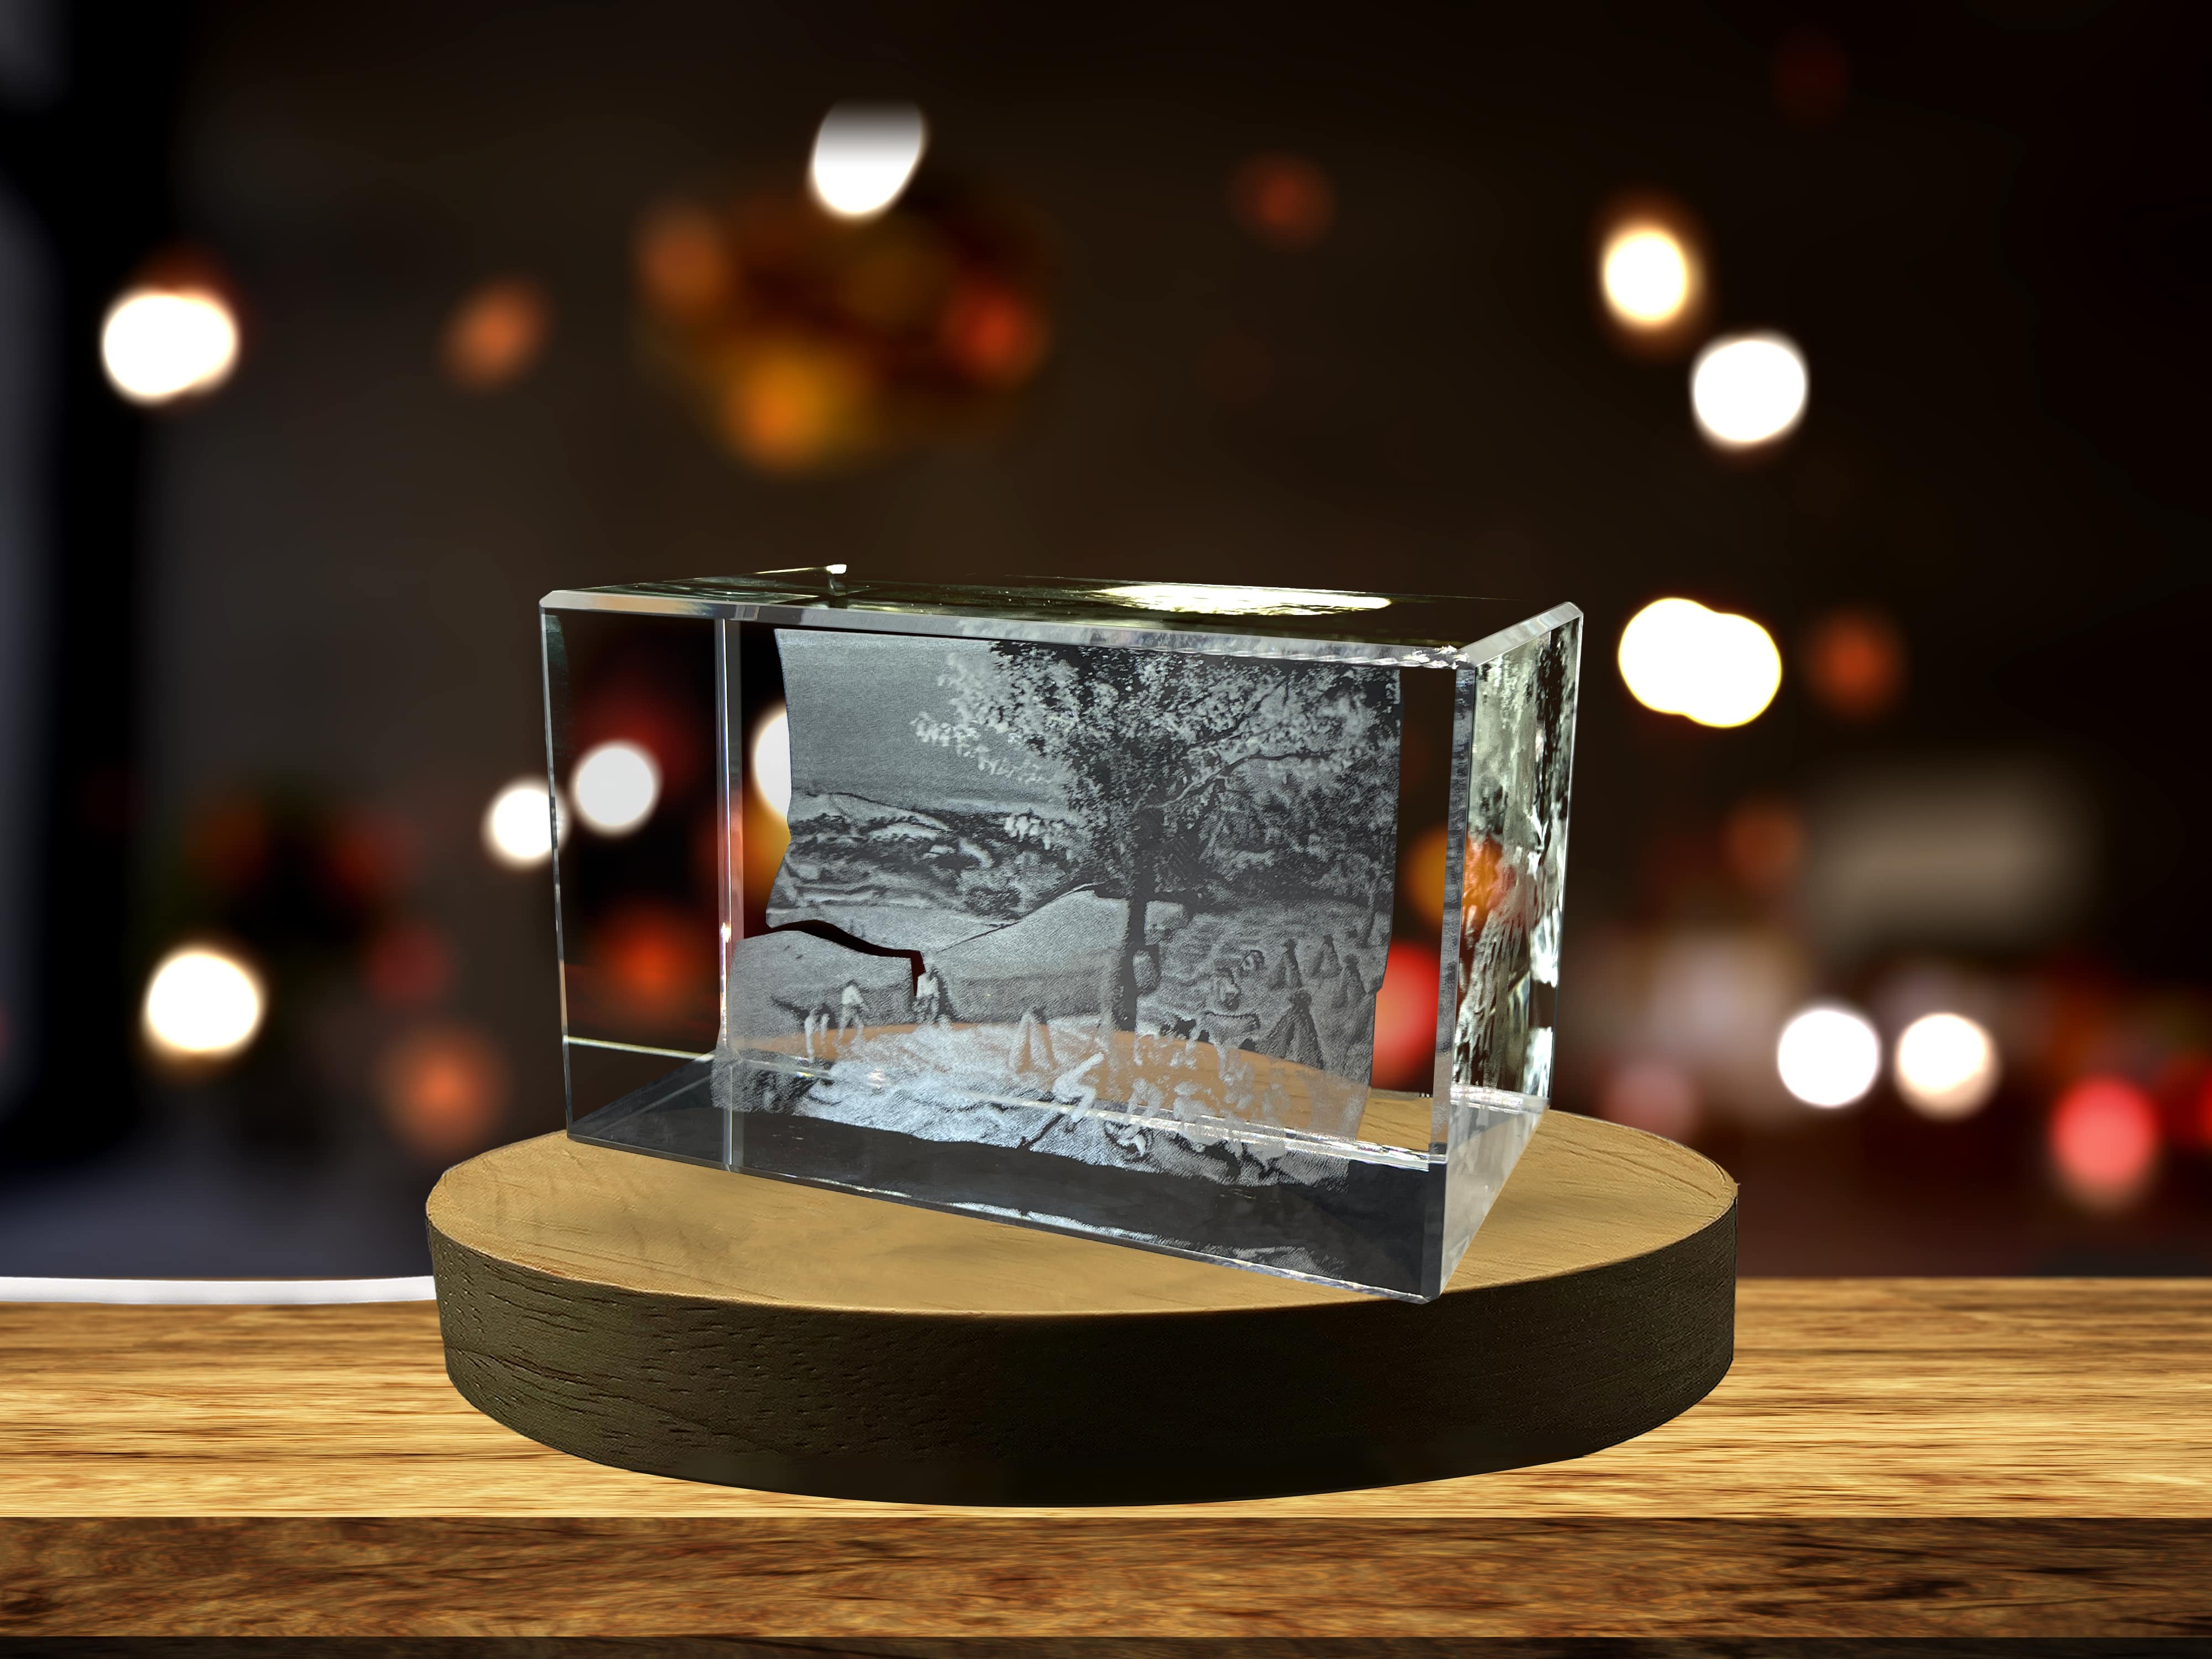 The Harvesters 3D Engraved Crystal Decor A&B Crystal Collection